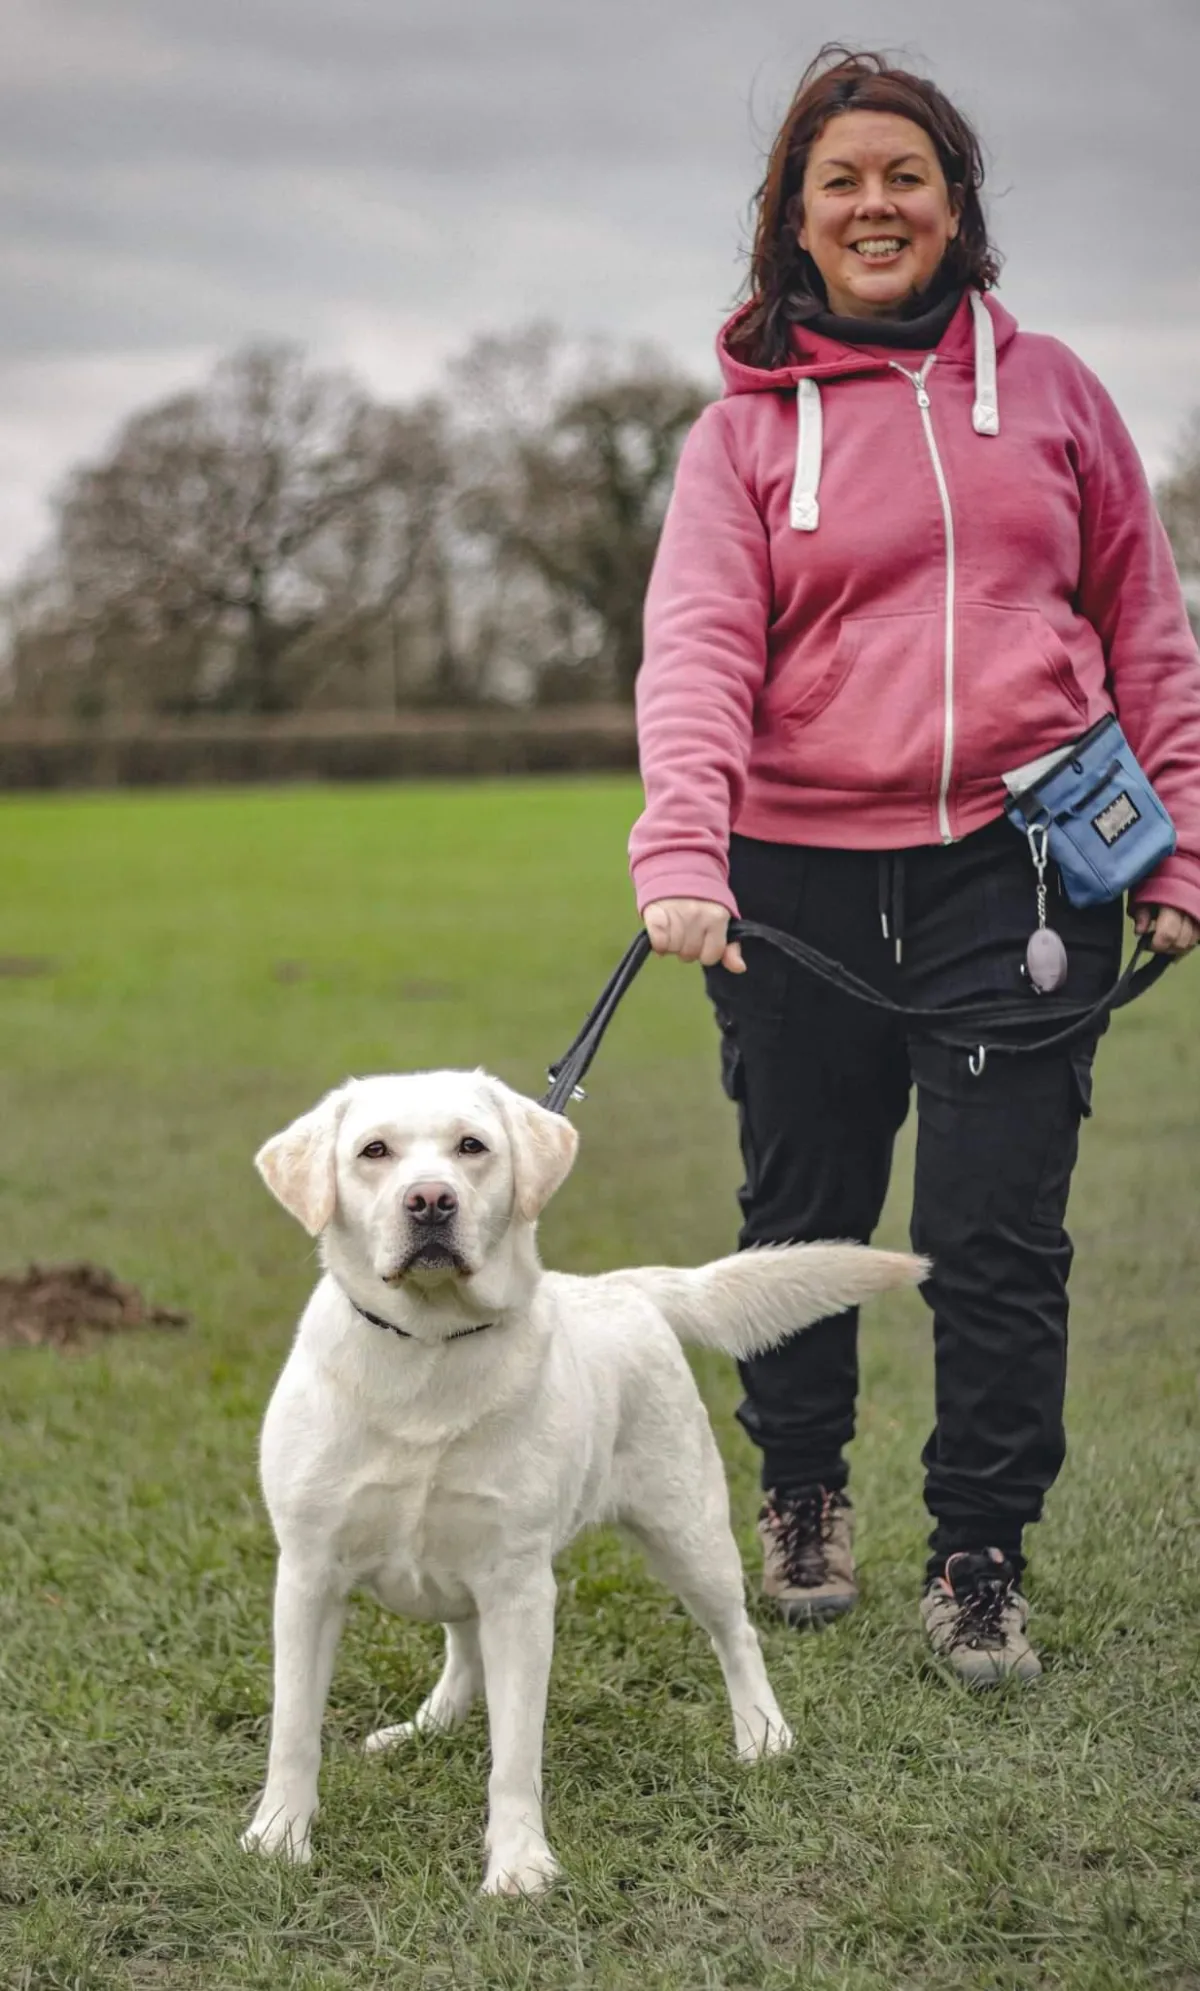 Sam Hughes Head Trainer with yellow labrador who was in the loose lead walking workshop due to pulling on its lead and the owners wanted him to walk nicely.